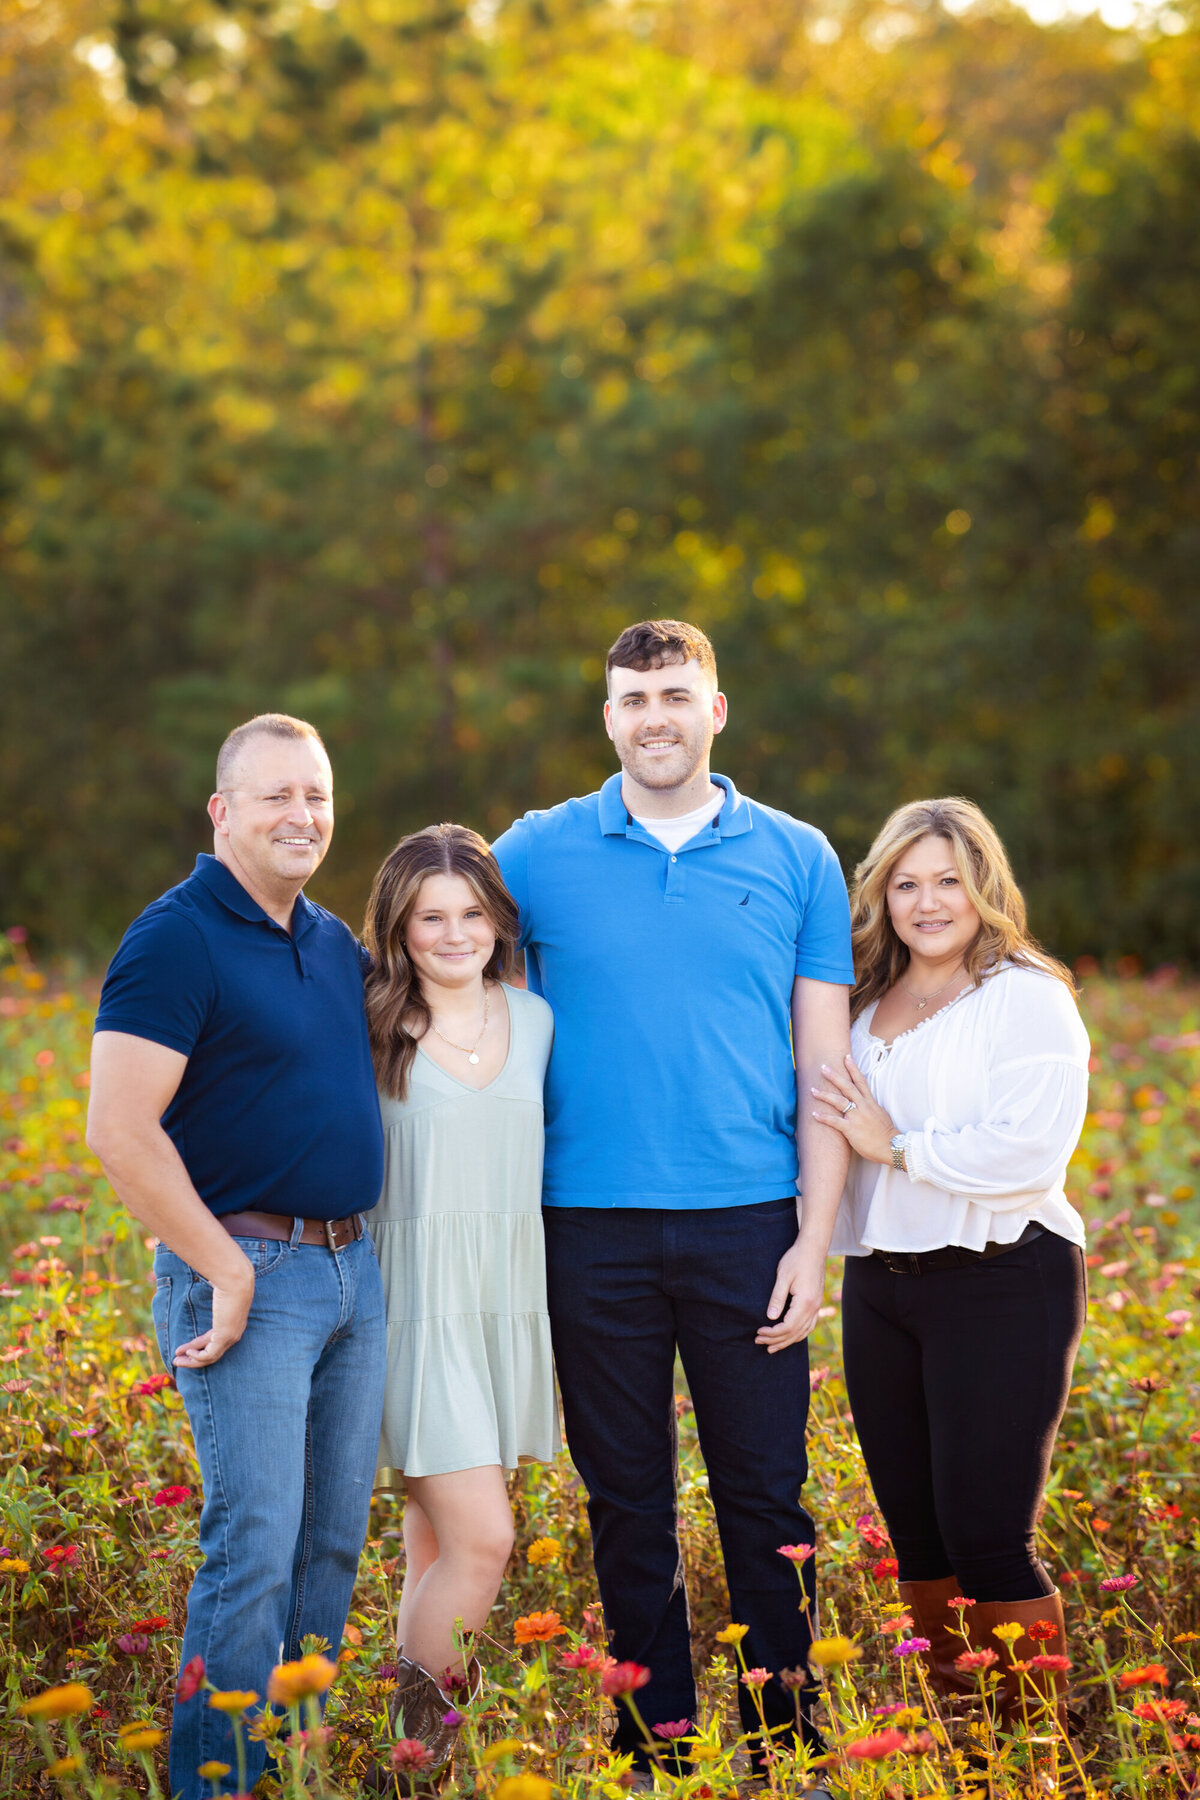 Family with teenage girl and adult sun standing in the zinnia field.  Dad is wearing a navy shirt and jeans.  Mom is wearing black leggings and a white shirt.  Teenage girl is wearing a pale mint dress and boots.  Adult son is wearing black jeans and a blue polo shirt.